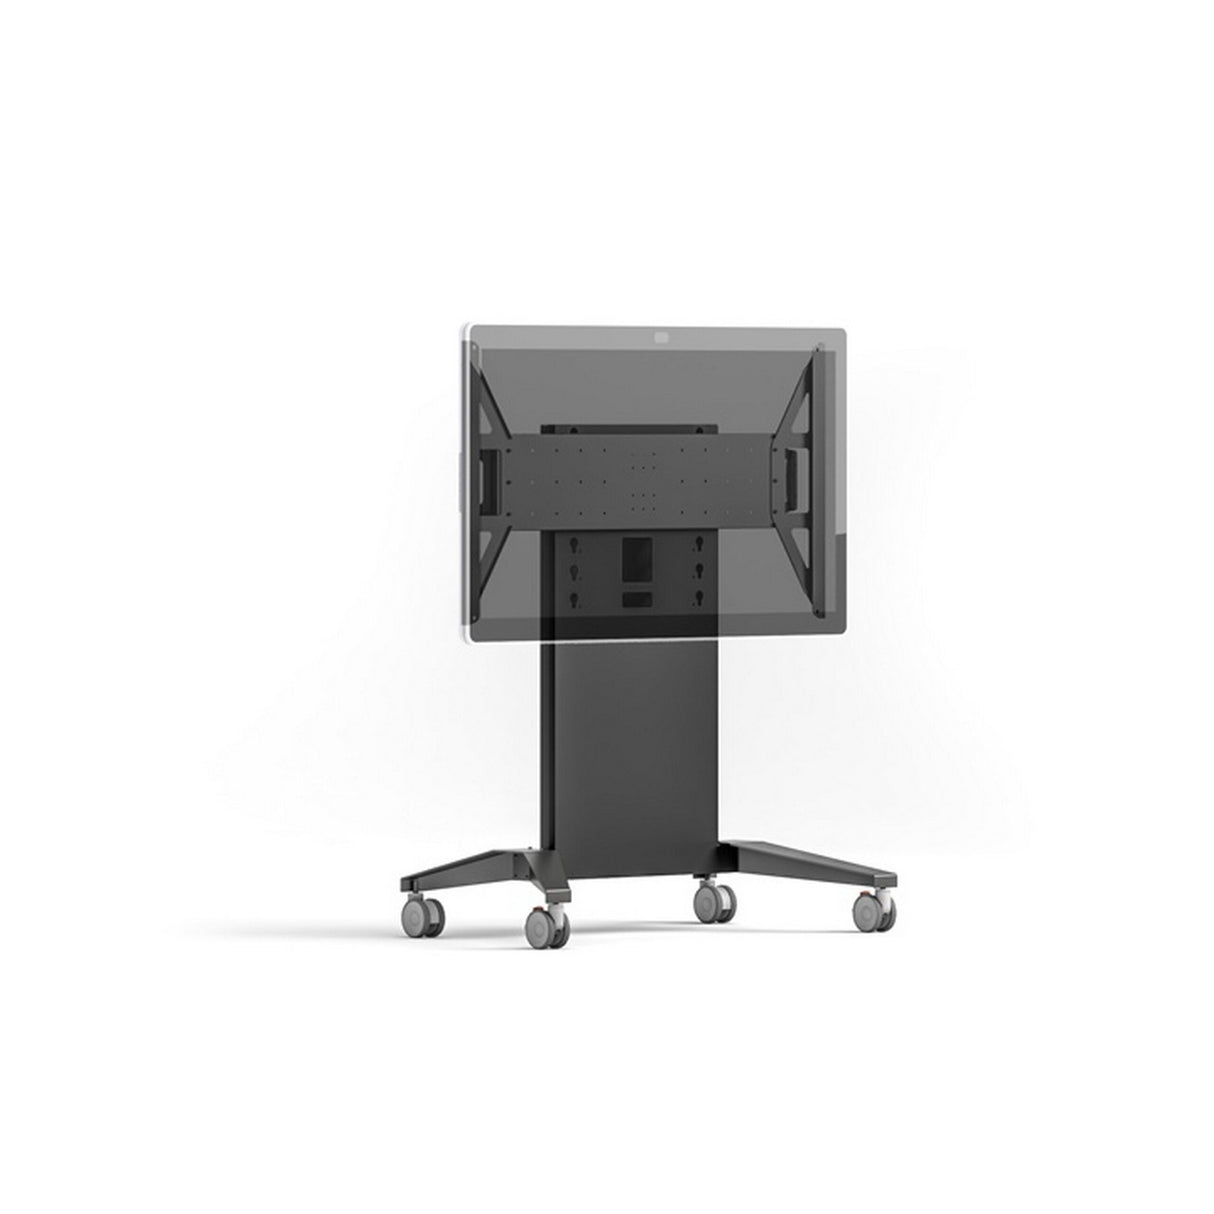 Salamander Design FPS1XL/FH/C2/GG Fixed Height Mobile/Wall Stand for Cisco Webex 70-Inch, Graphite and Gray